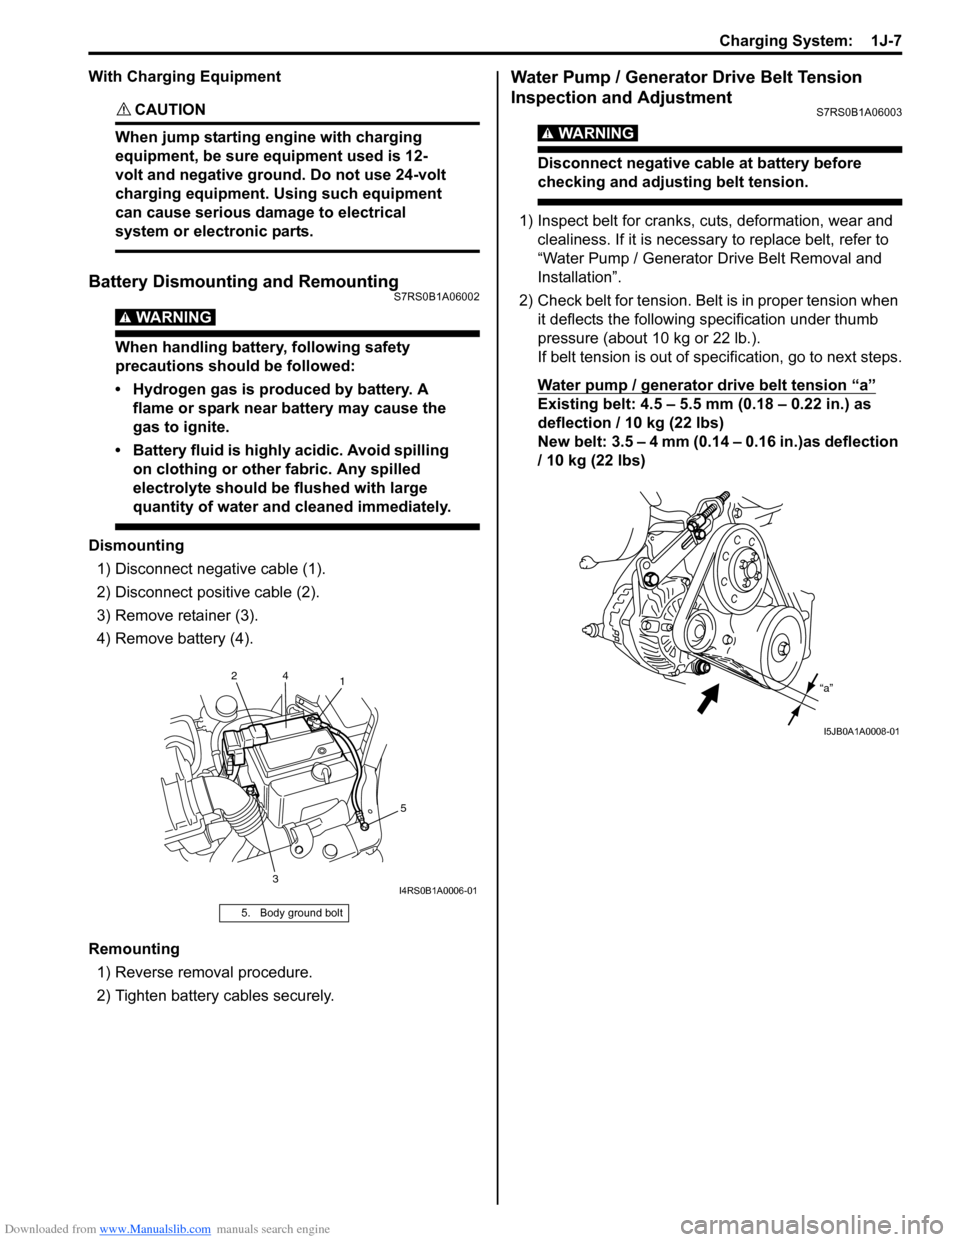 SUZUKI SWIFT 2007 2.G Service Workshop Manual Downloaded from www.Manualslib.com manuals search engine Charging System:  1J-7
With Charging Equipment
CAUTION! 
When jump starting engine with charging 
equipment, be sure equipment used is 12-
volt